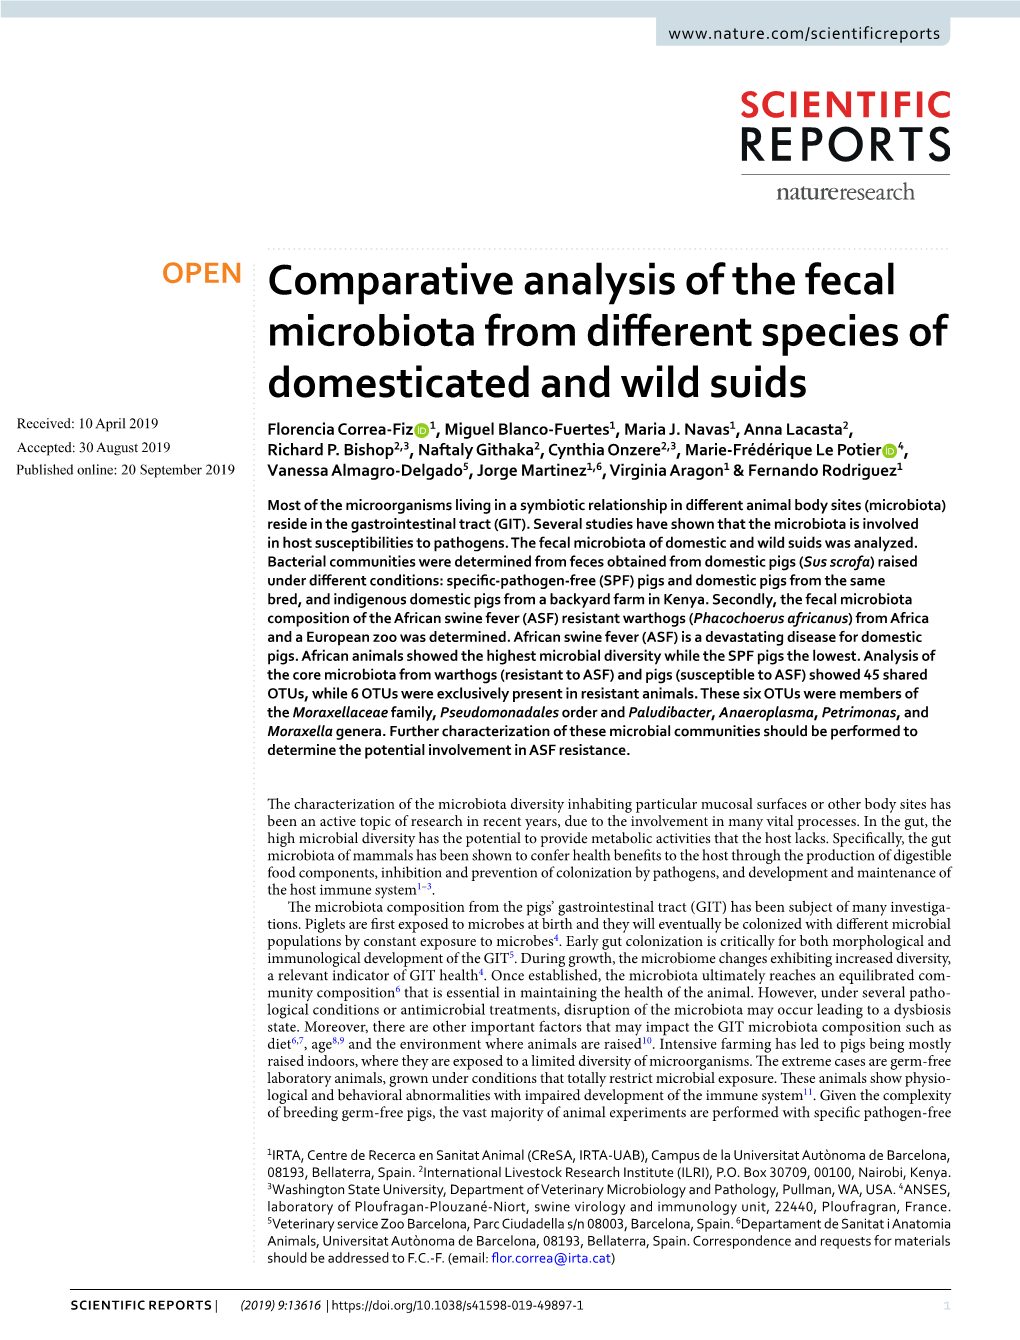 Comparative Analysis of the Fecal Microbiota from Different Species Of